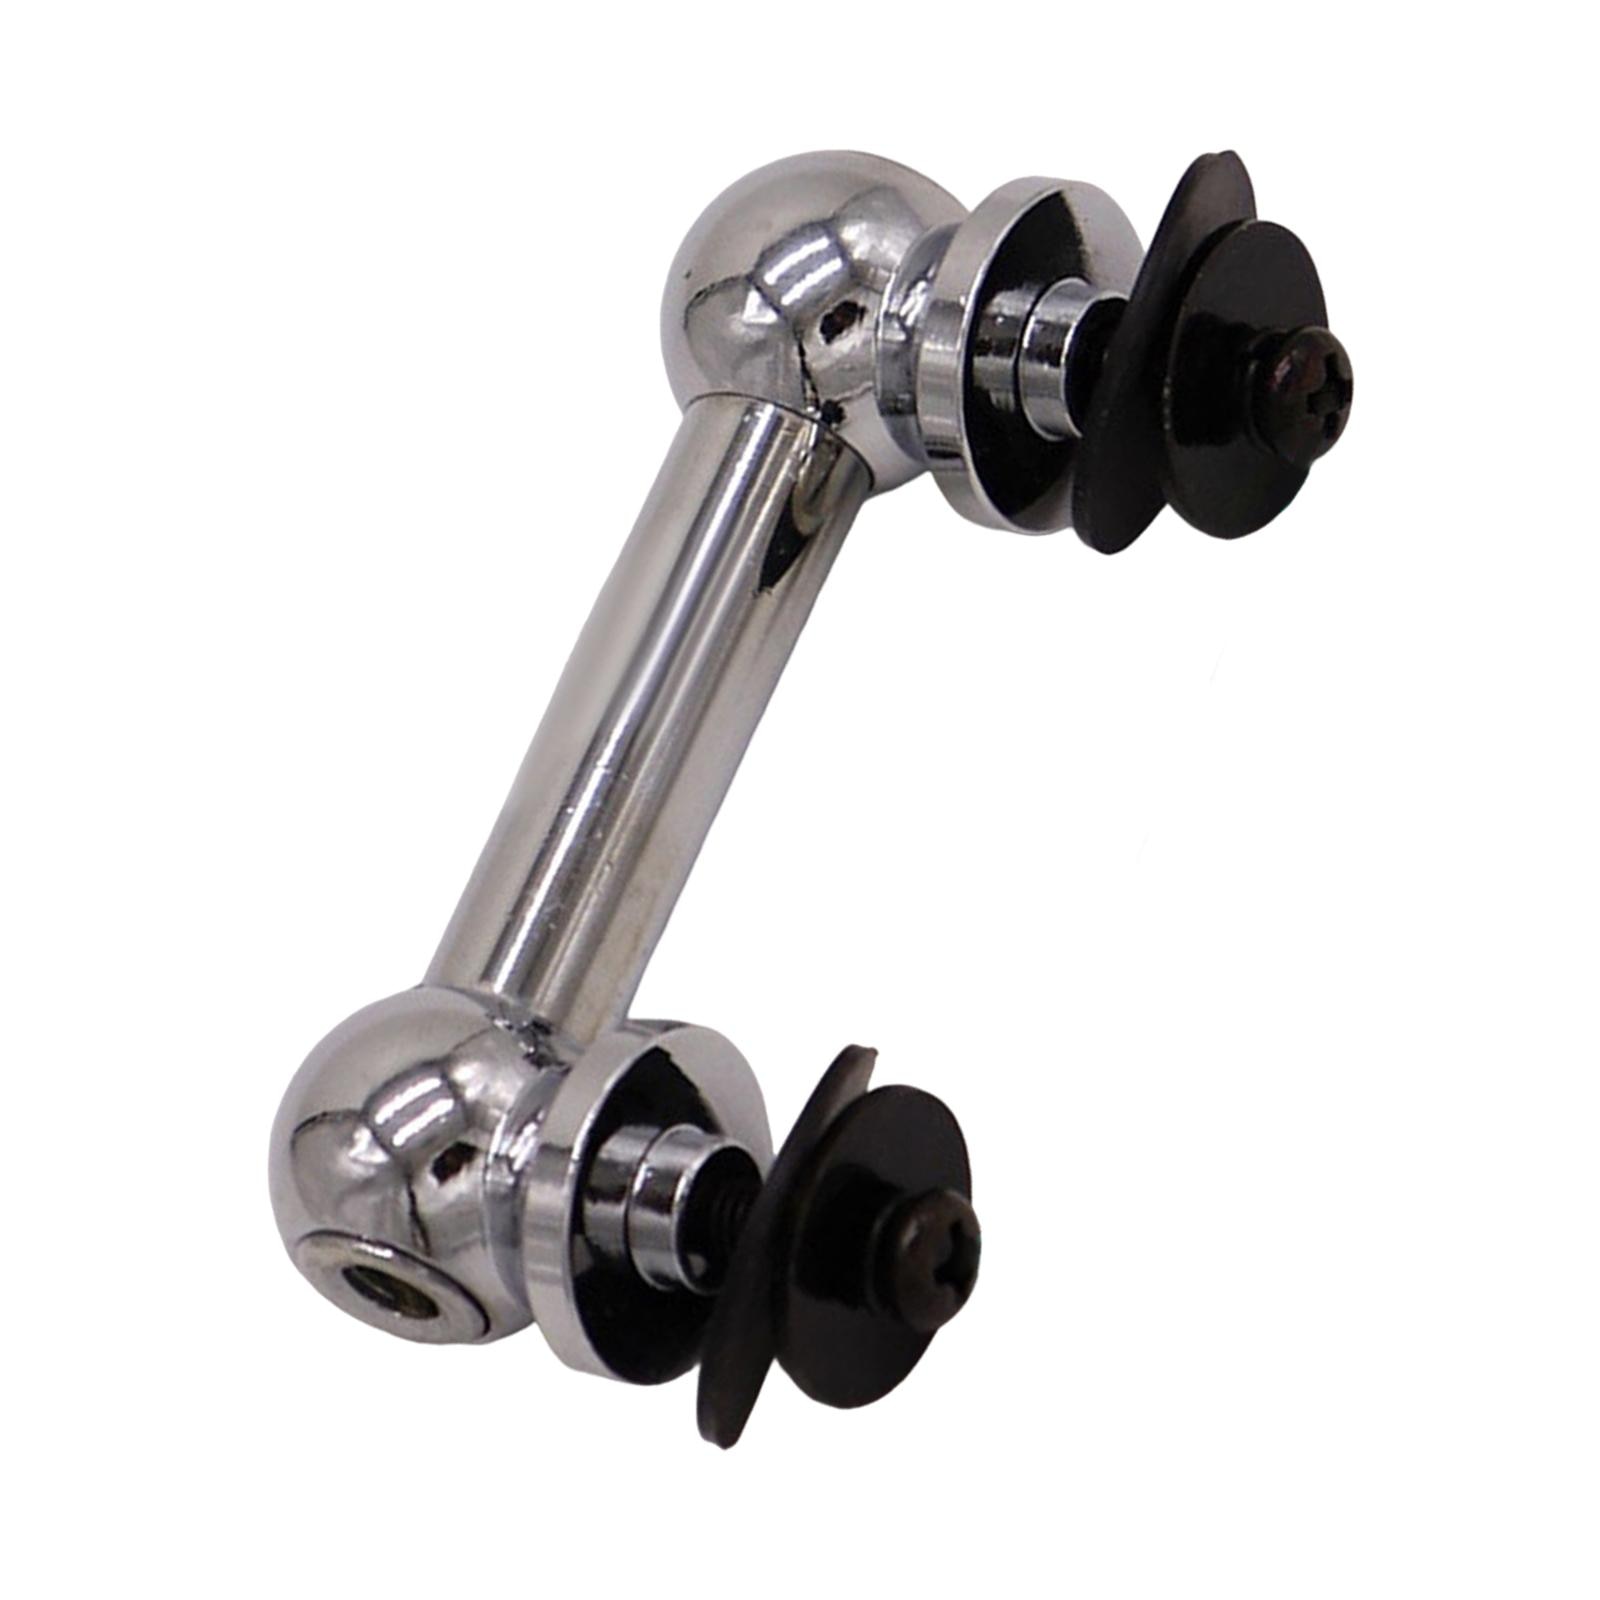 51mm Double End Drum Lugs Two Side Drum Lug Snare Drum Lug Drum Accessories